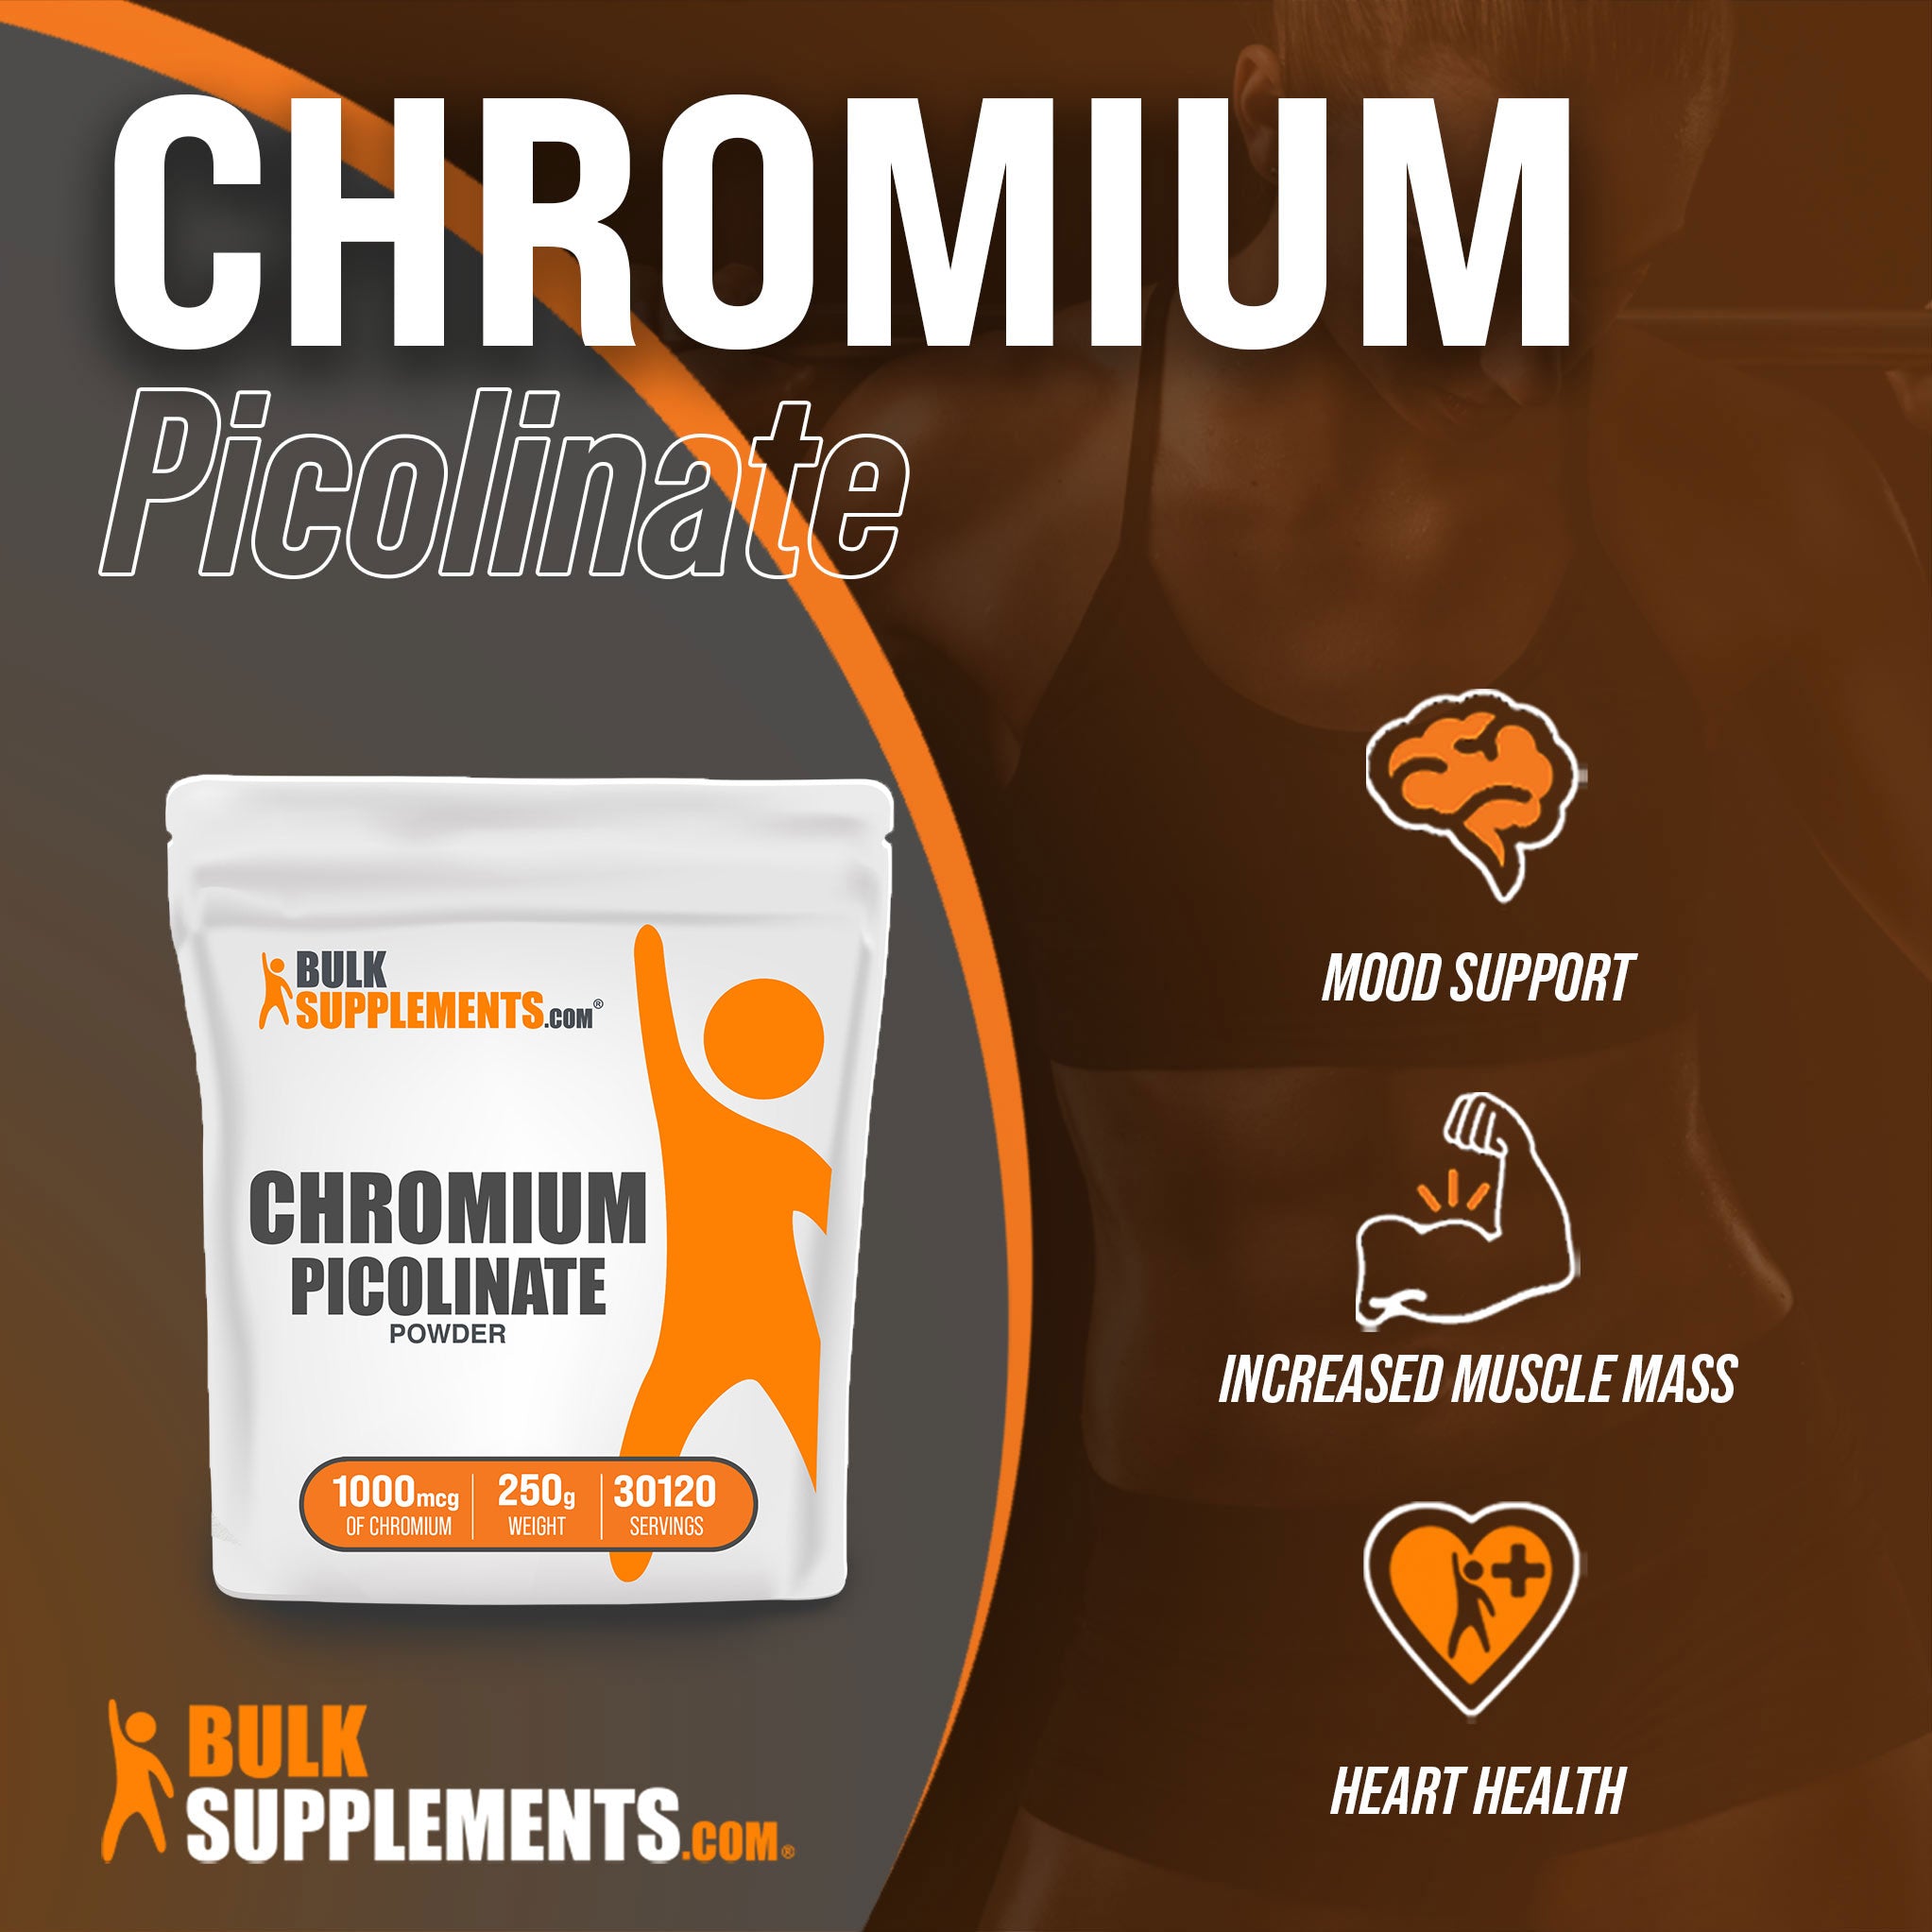 250g of chromium picolinate 1000mcg for weight loss, mood support and more